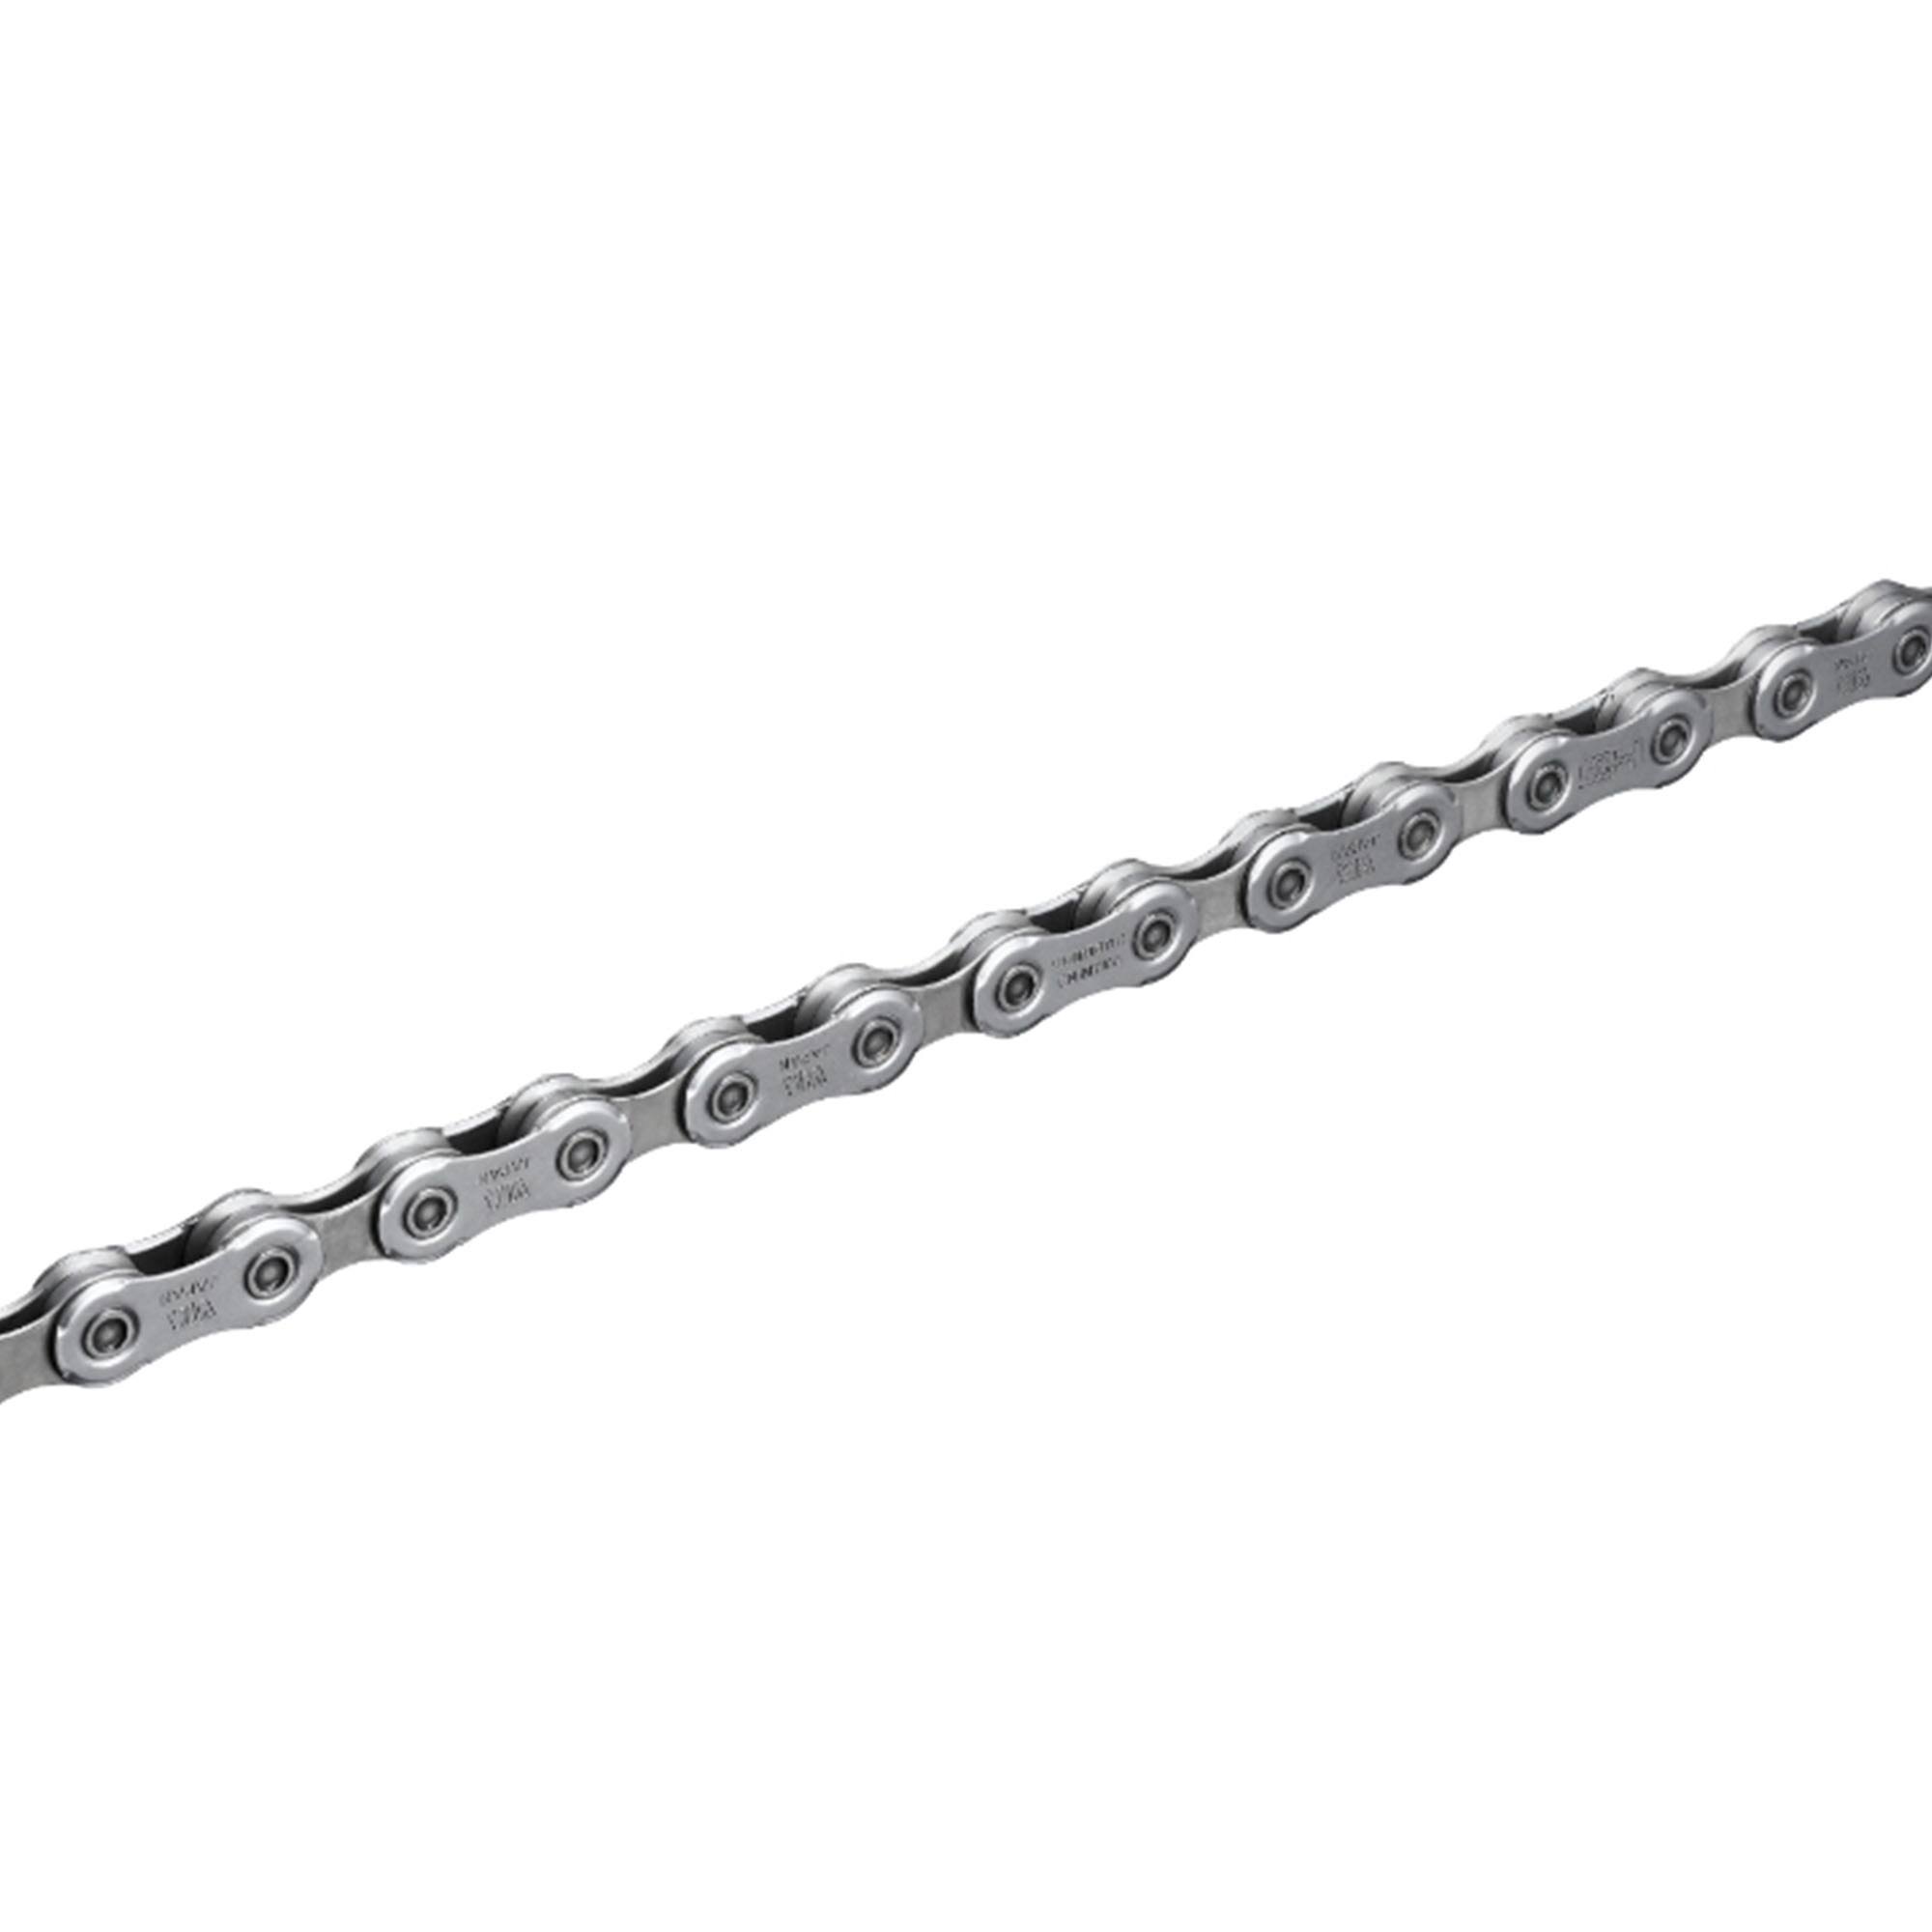 Shimano Speed Chain with Quick Link 1 - Silver, 12 Speed, 126 Links